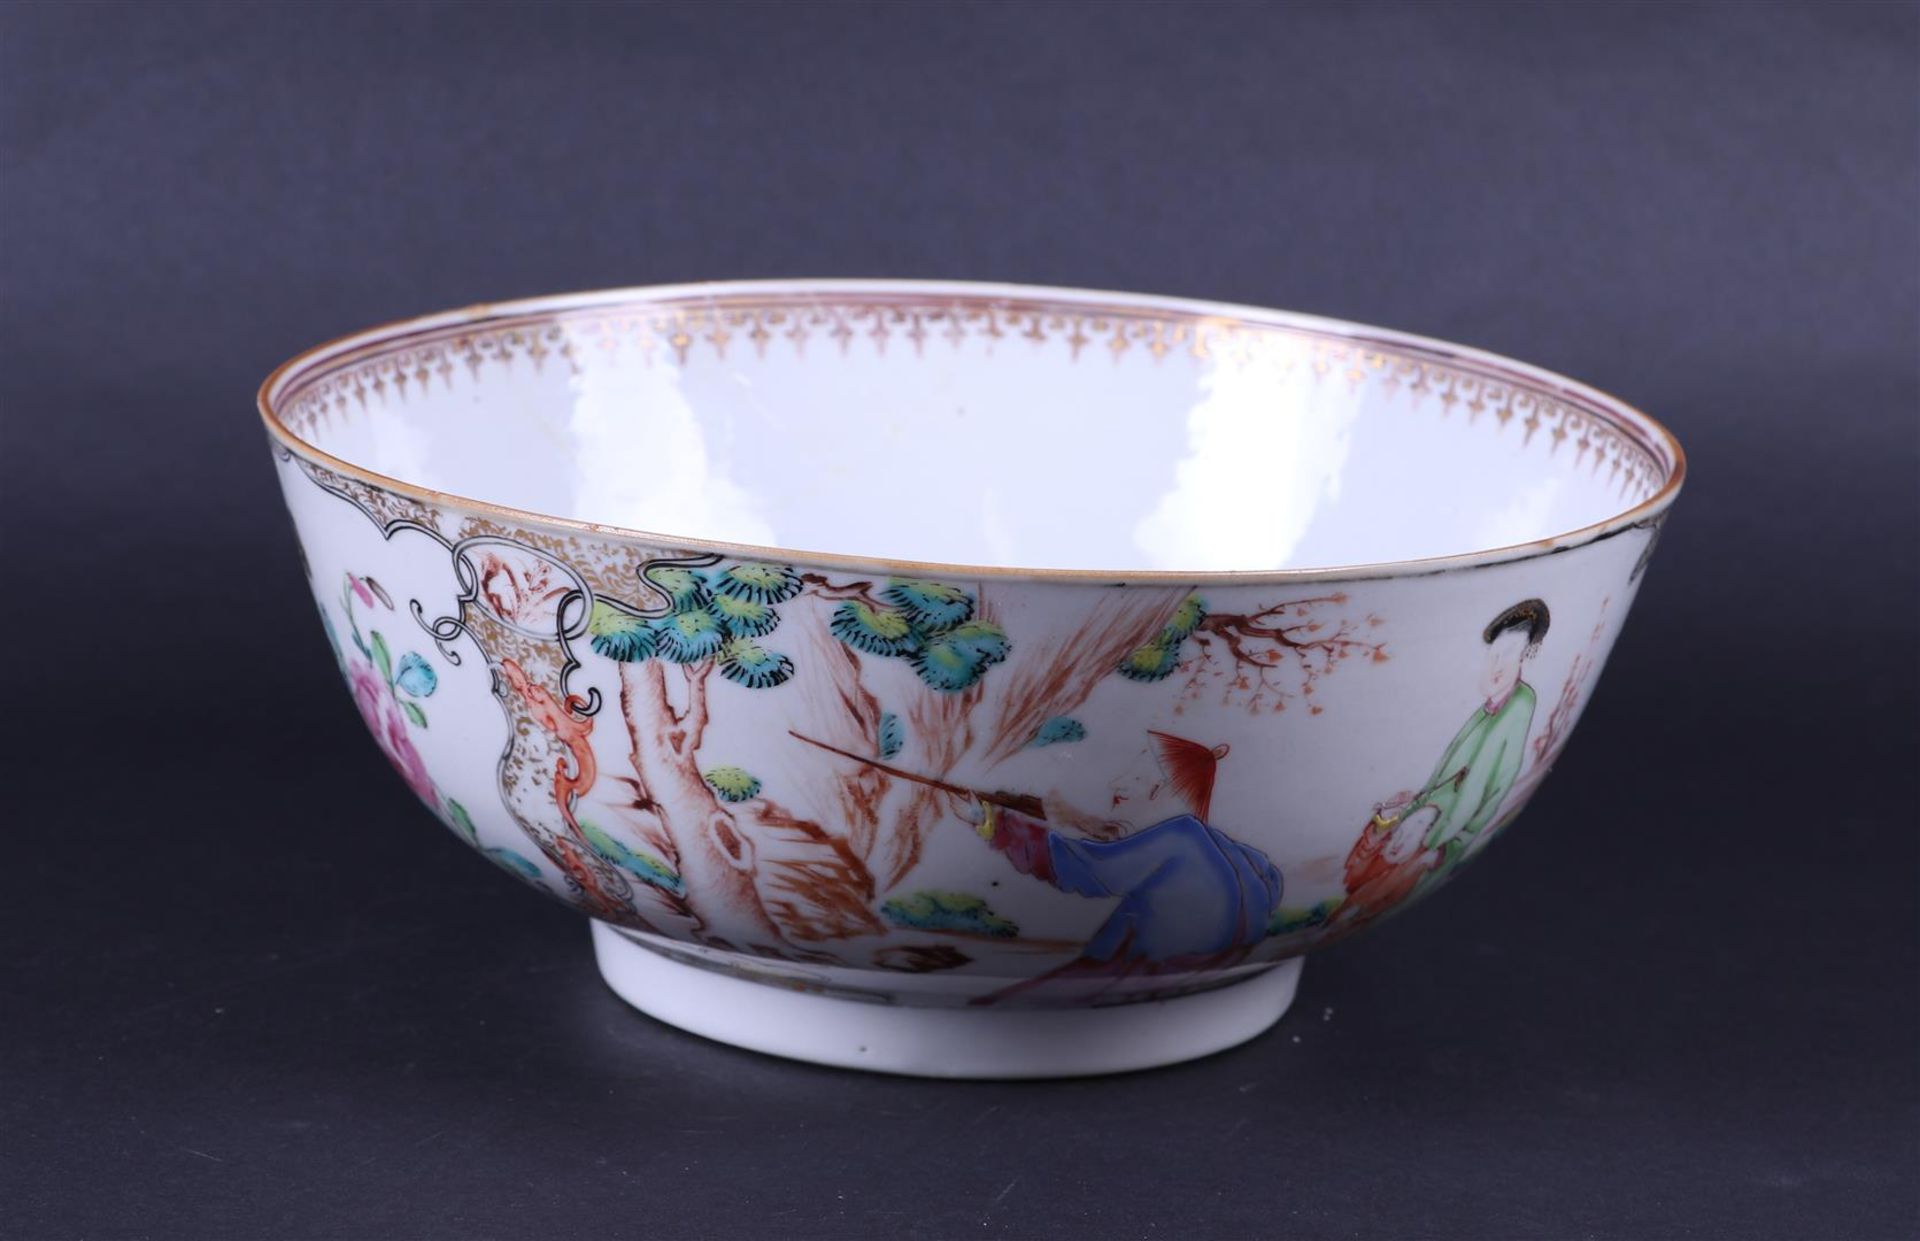 A large porcelain Chine de comande bowl decorated with various figures. China, 18th century. - Image 5 of 6